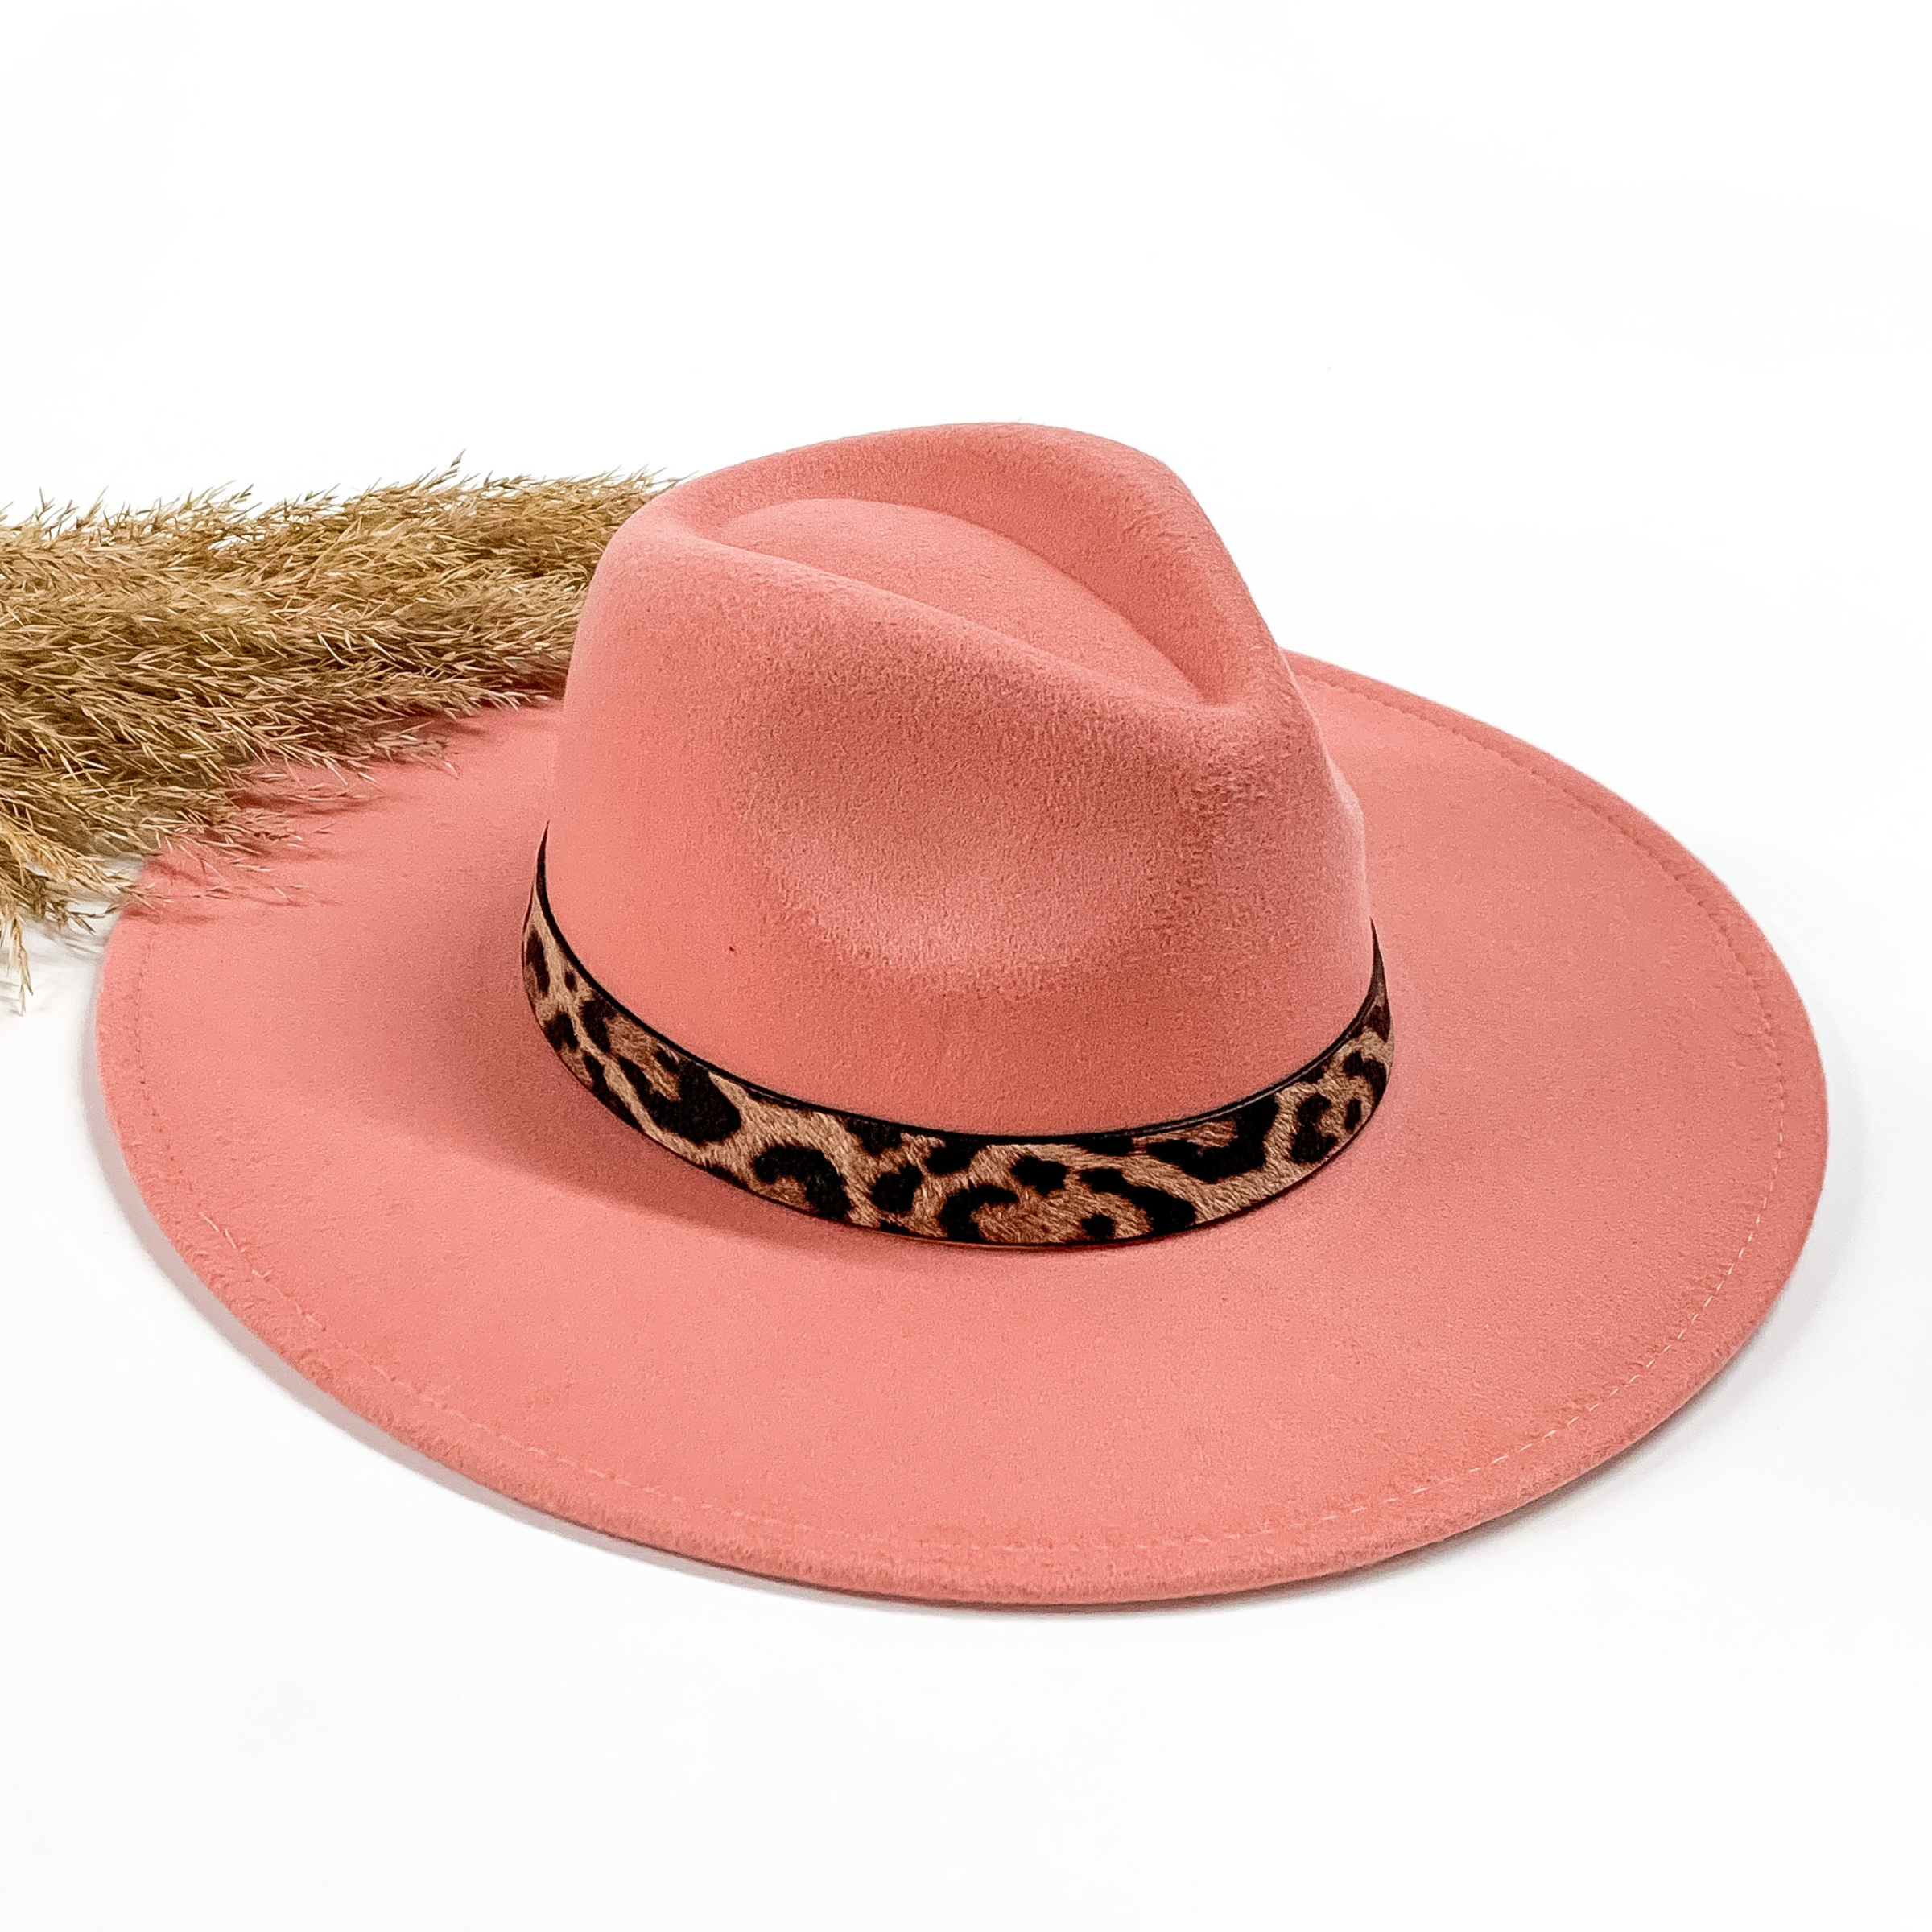 Blush faux felt hat with a leopard print hat band. This hat is pictured on a white background with tan pompous in the background. 